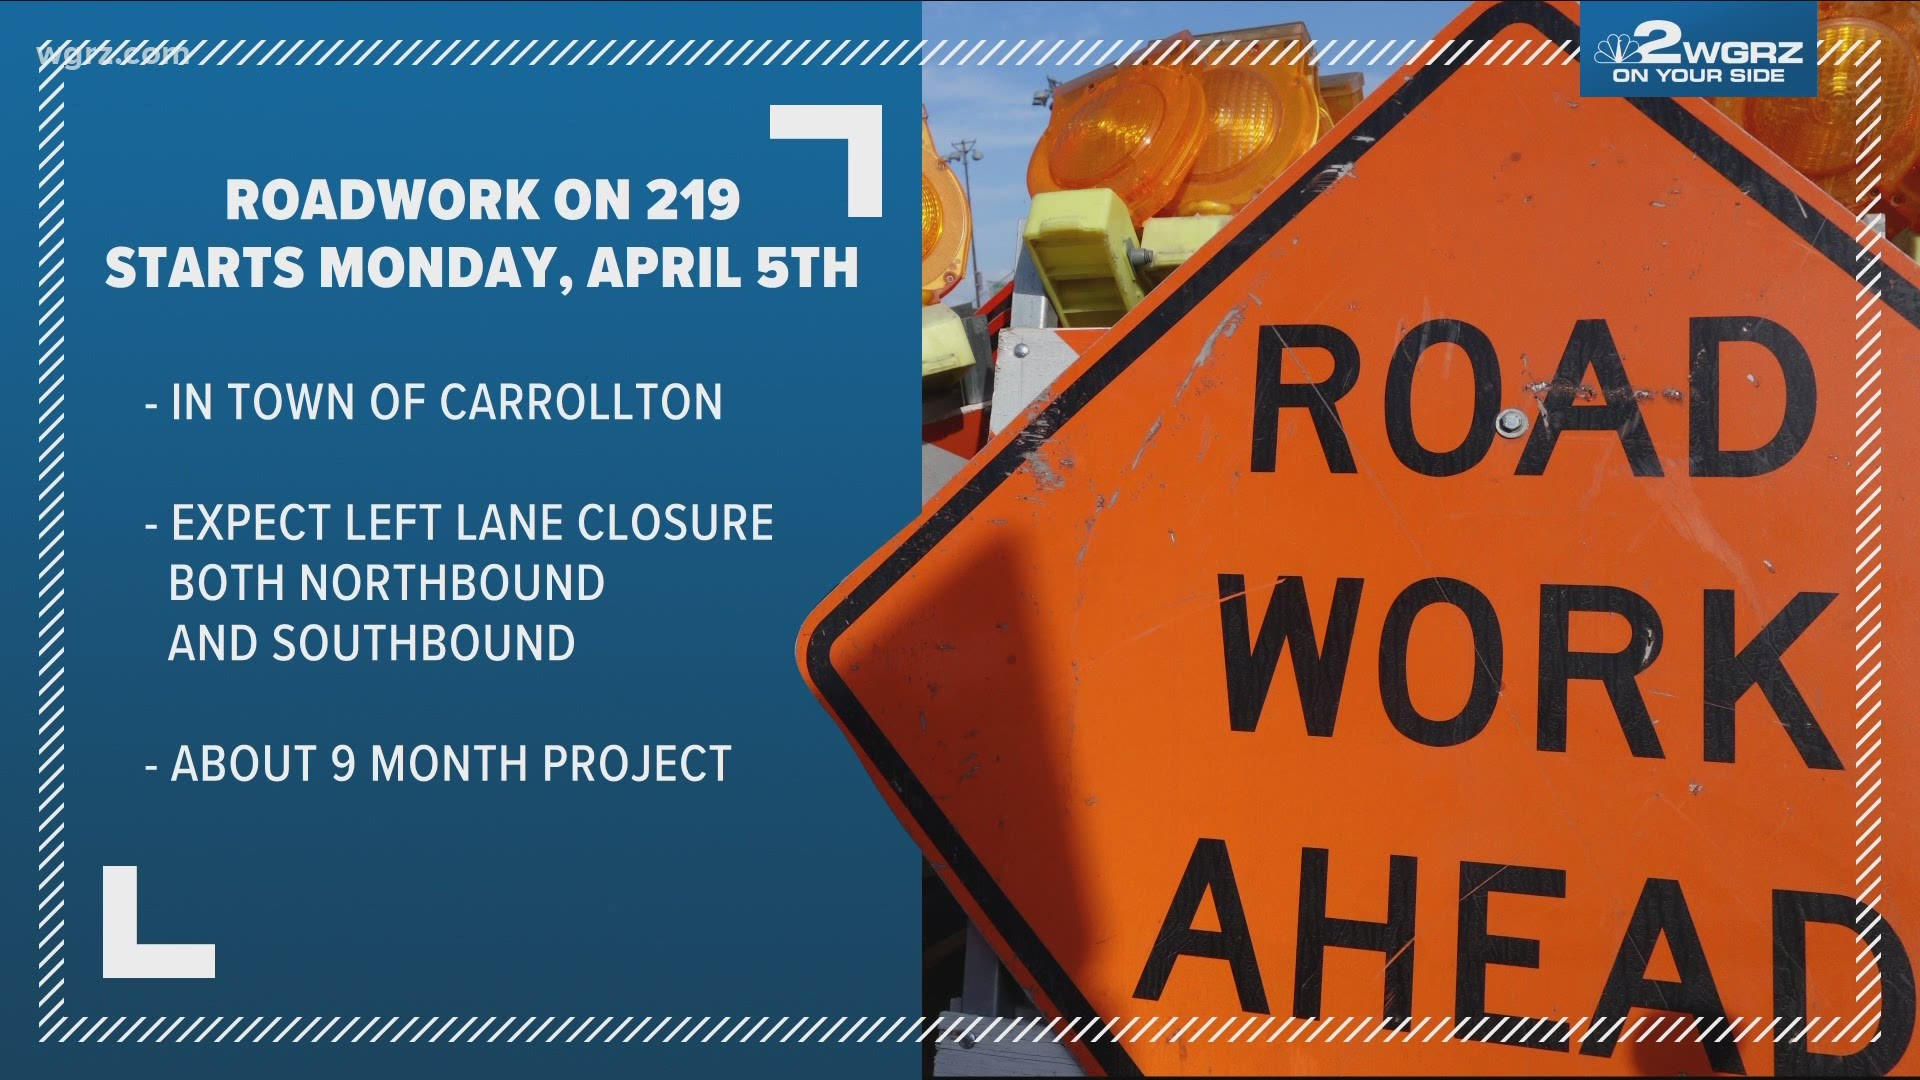 Carrolton road work starts tomorrow. Expect left lane closures both northbound and southbound starting at the Pennsylvania border on the 219.